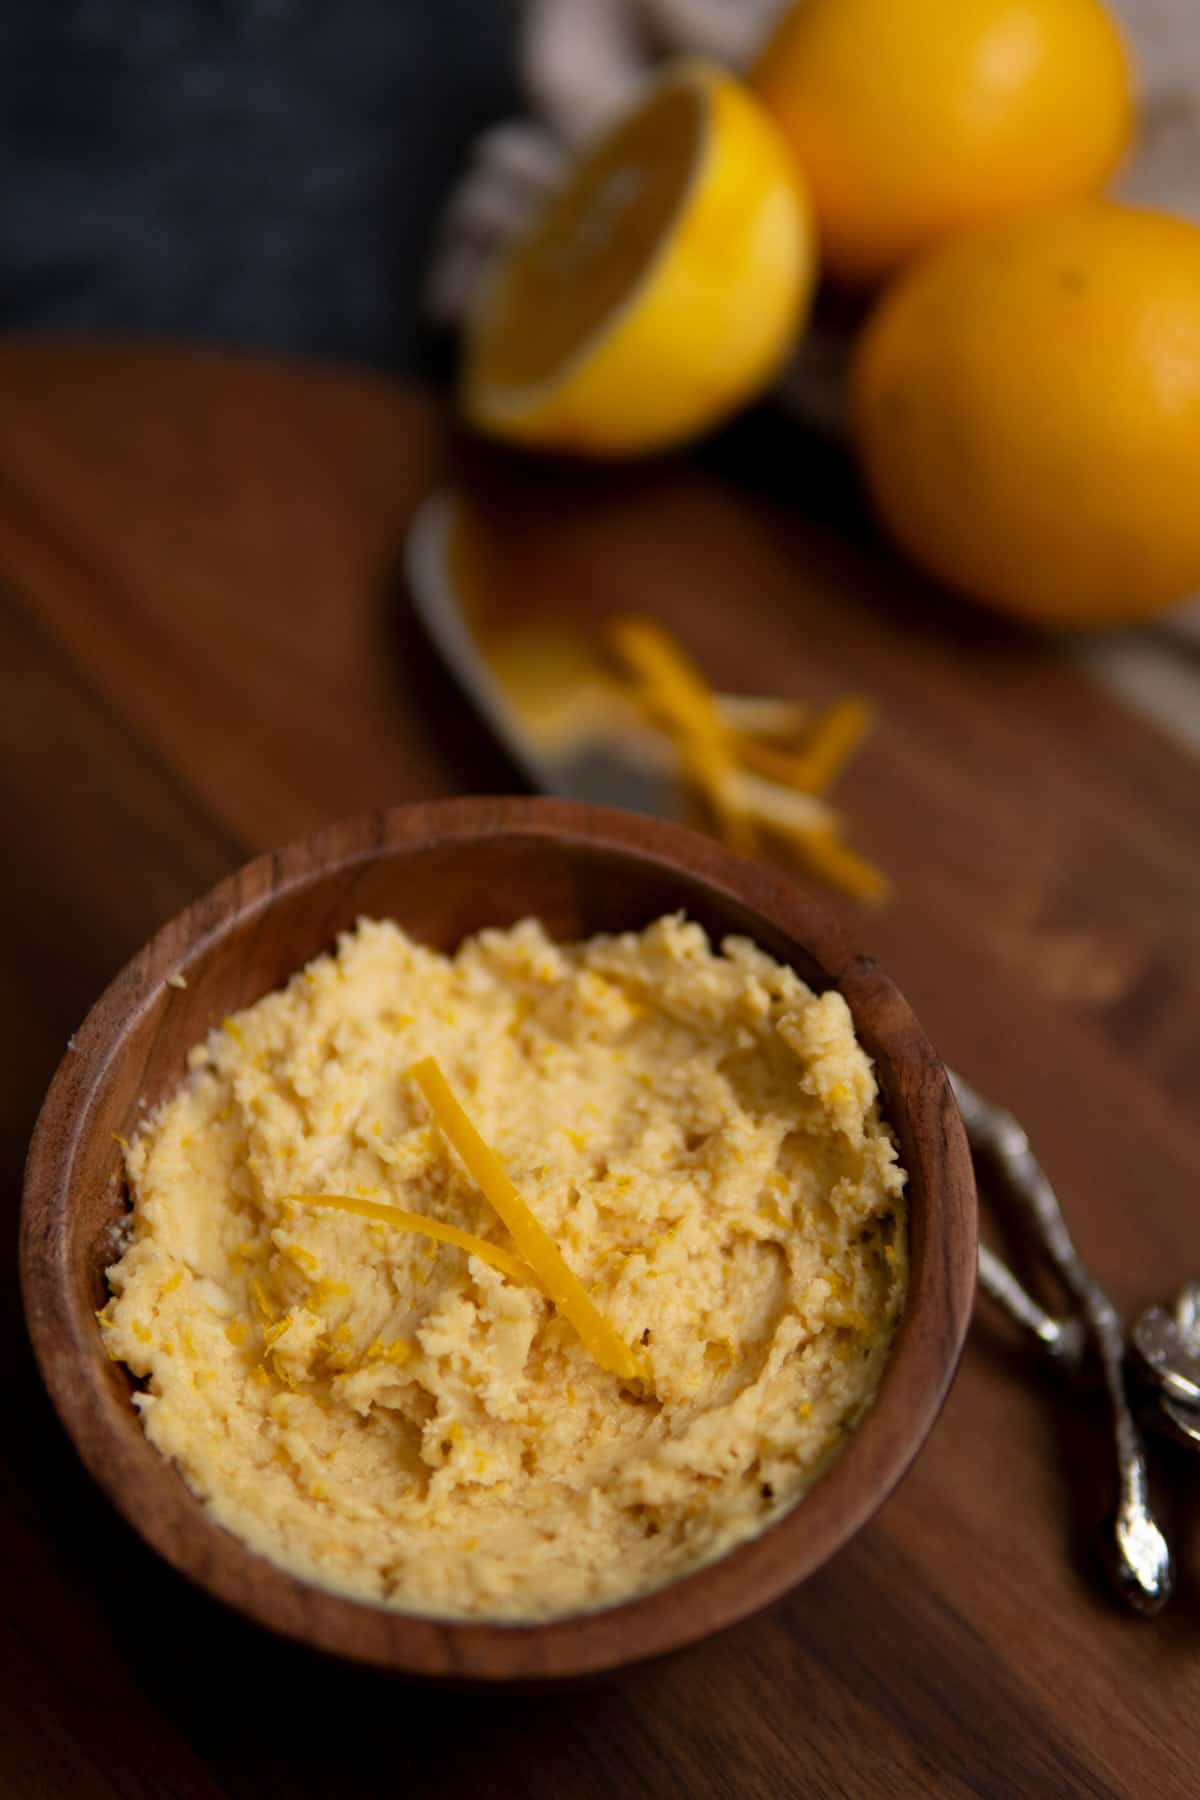 miso butter in a wooden bowl with orange zest